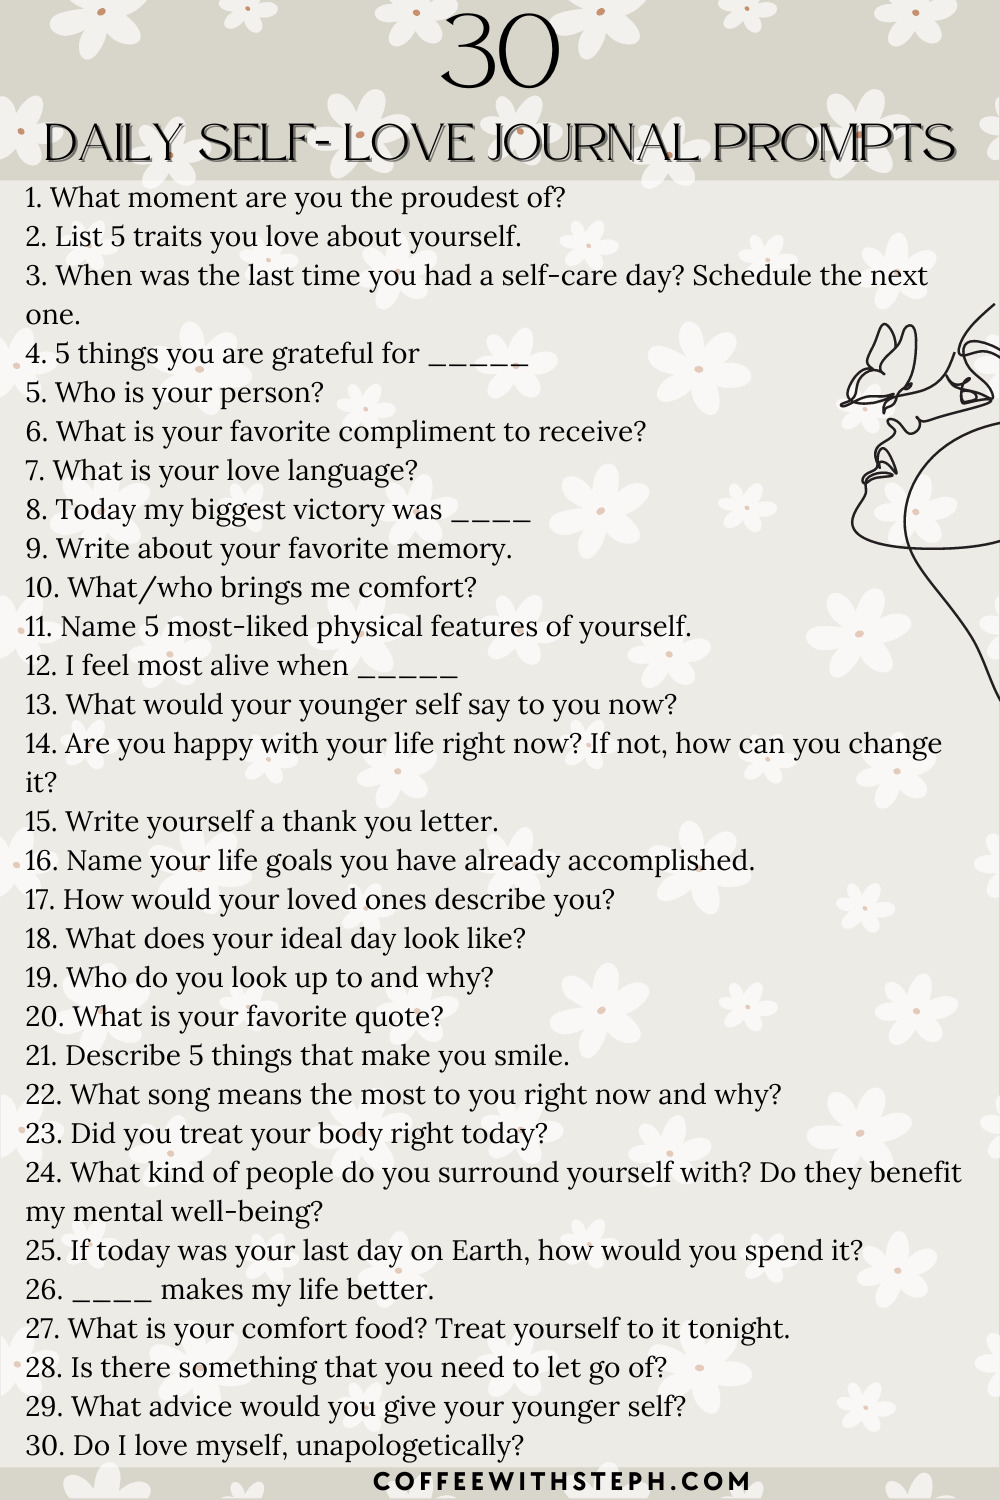 30 Days of Self-Love Journal Prompts: Become a Better You